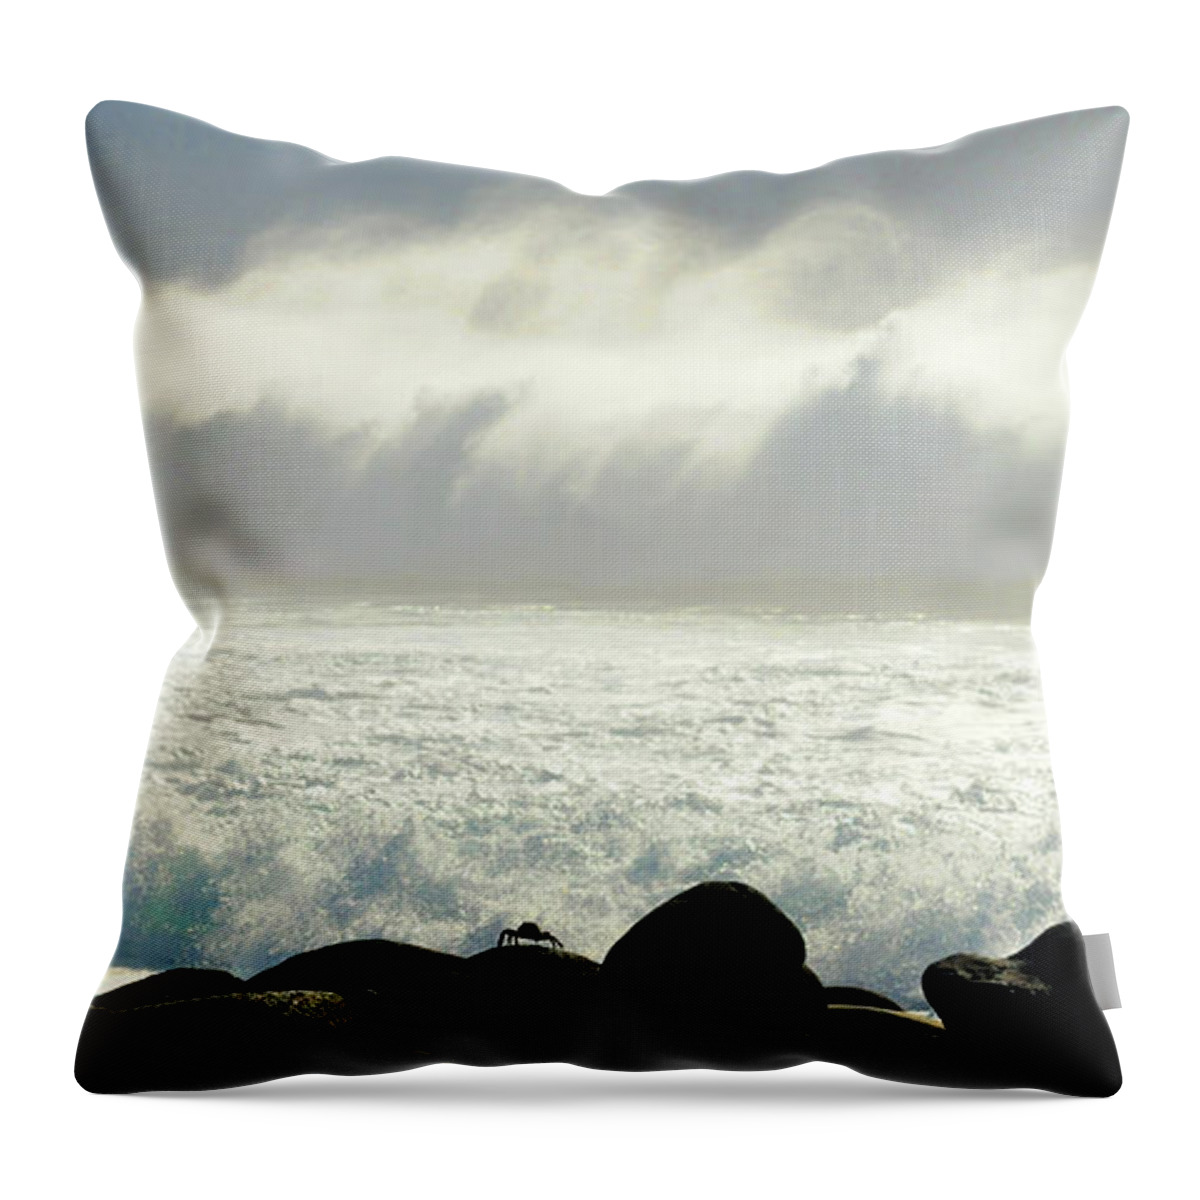 Crab Throw Pillow featuring the photograph Crab Awaiting Impending Wave by Ted Keller